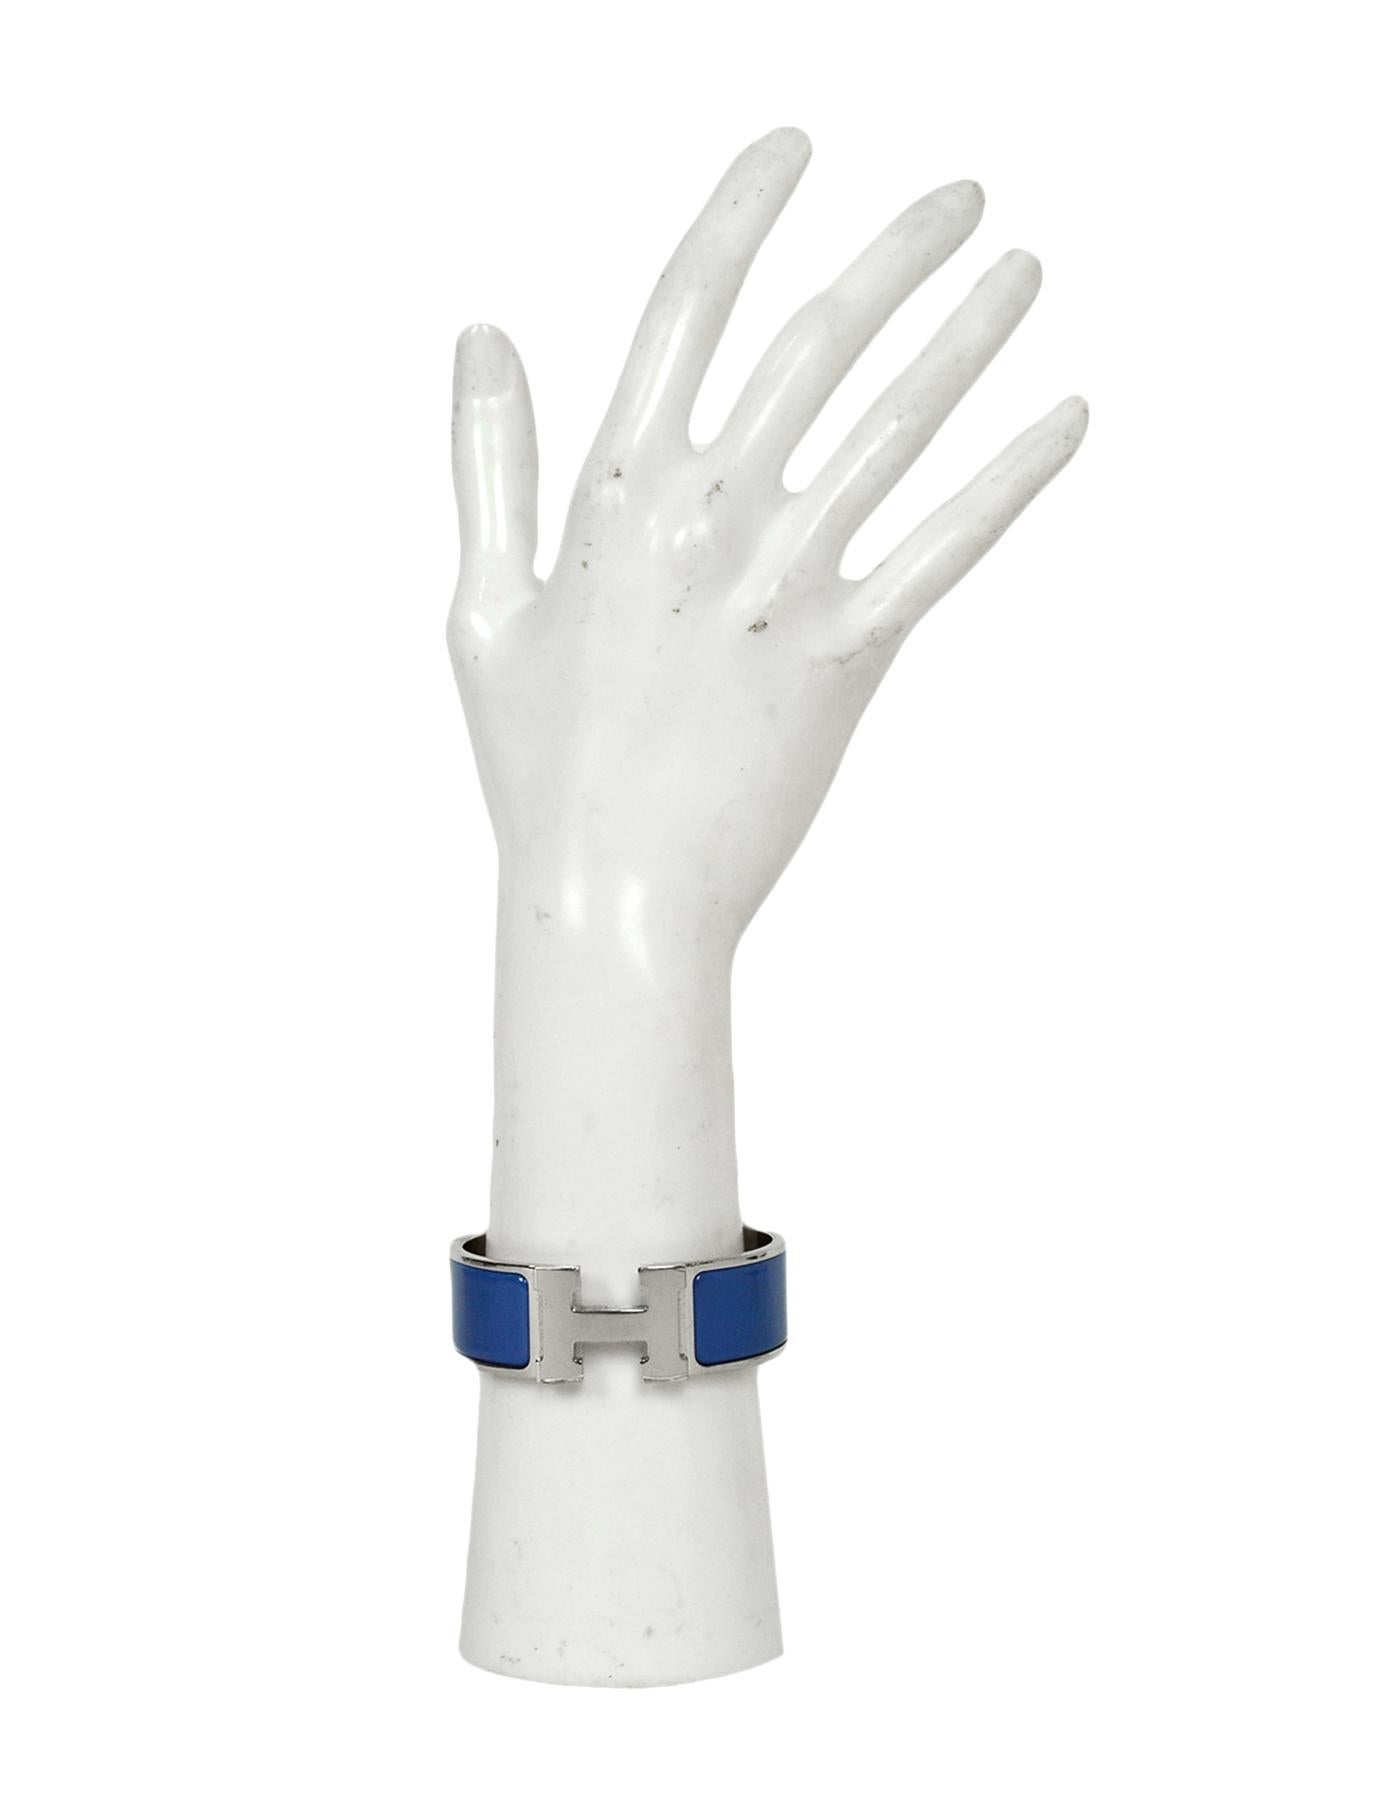 Hermes New Bleu Turquin/Palladium Wide Enamel H Clic Clac Bracelet

Color: Denim blue and silvertone
Materials: Enamel, palladium plated metal
Closure/Opening: Swivel H
Overall Condition: Like new pre-owned condition, protective plastic still on H. 